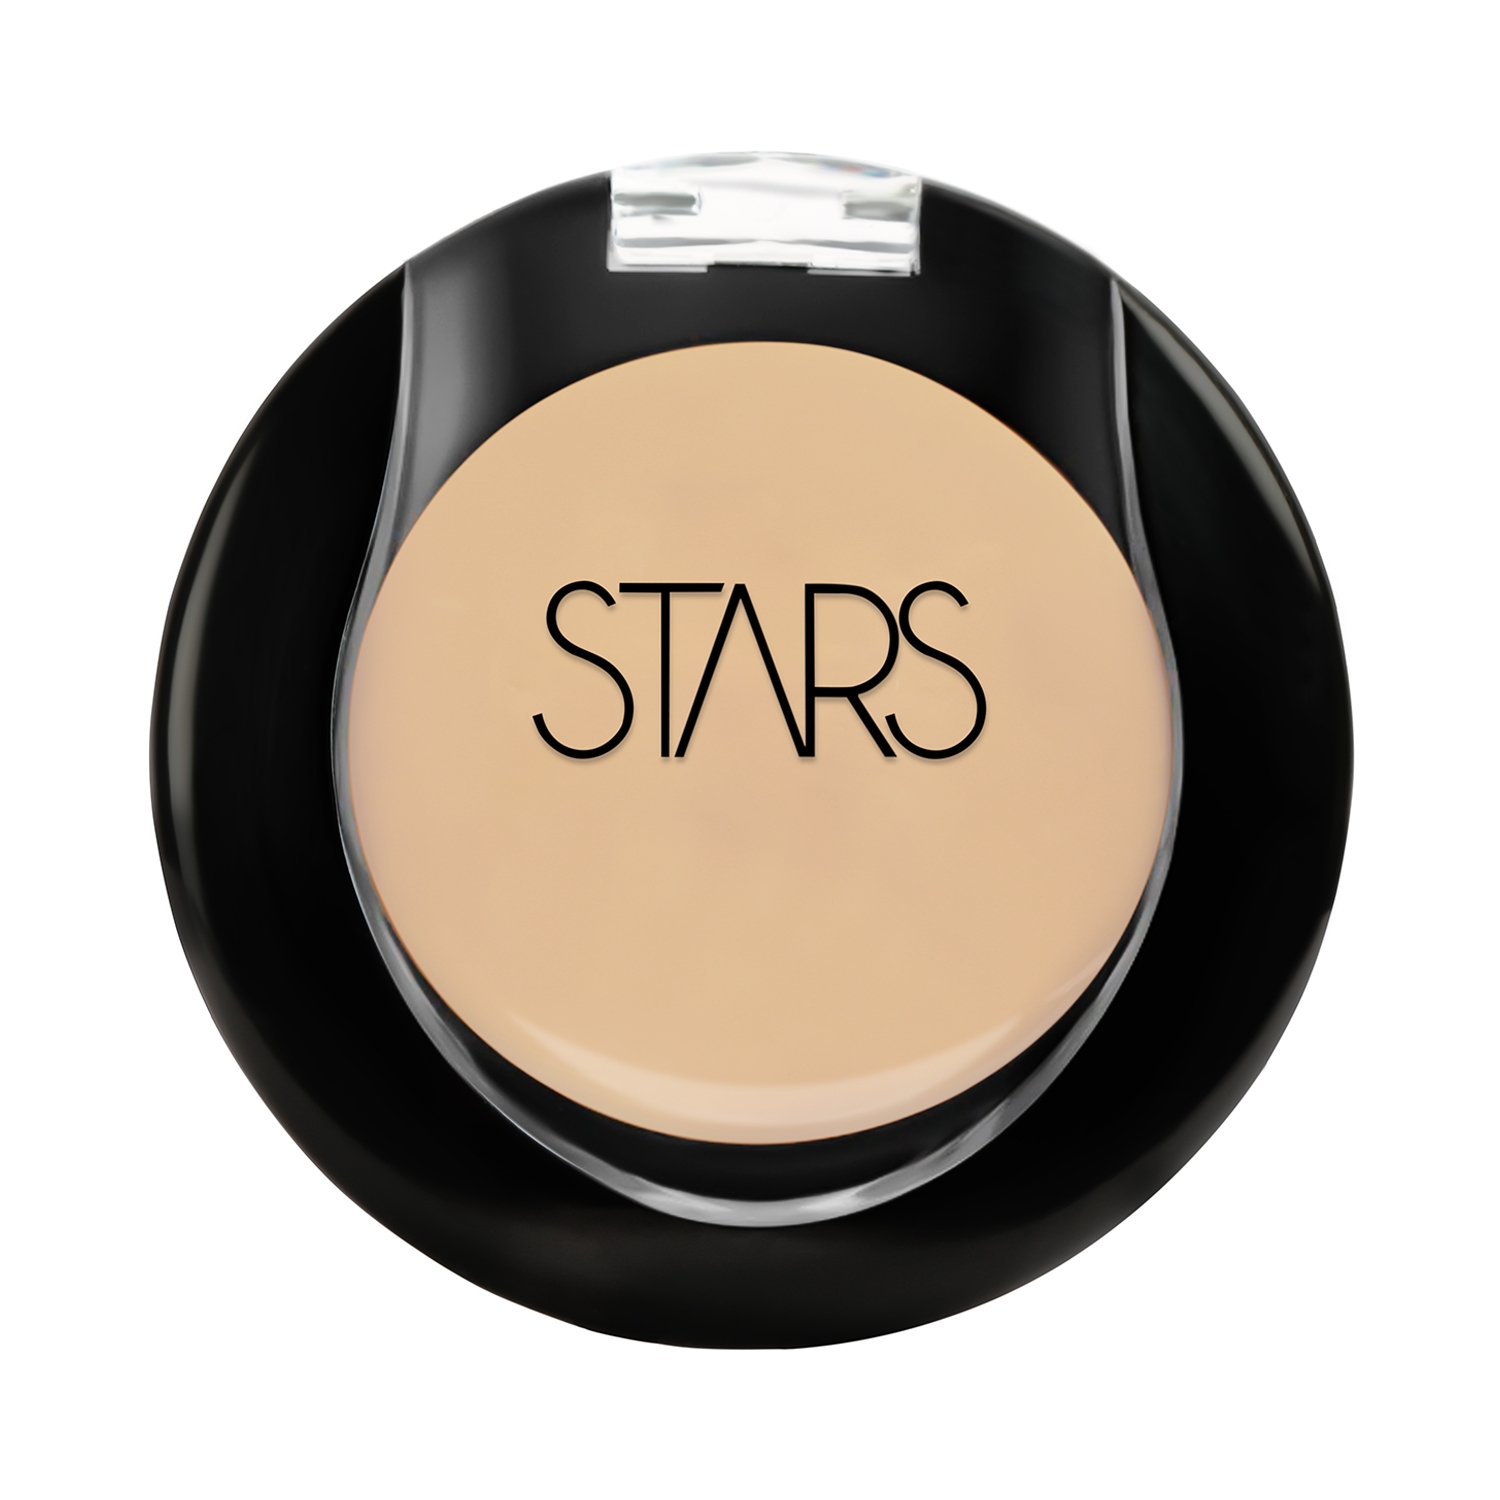 Stars Cosmetics | Stars Cosmetics Matte Finish Face Makeup Cream Concealer for All Skin Types - Light (5g)